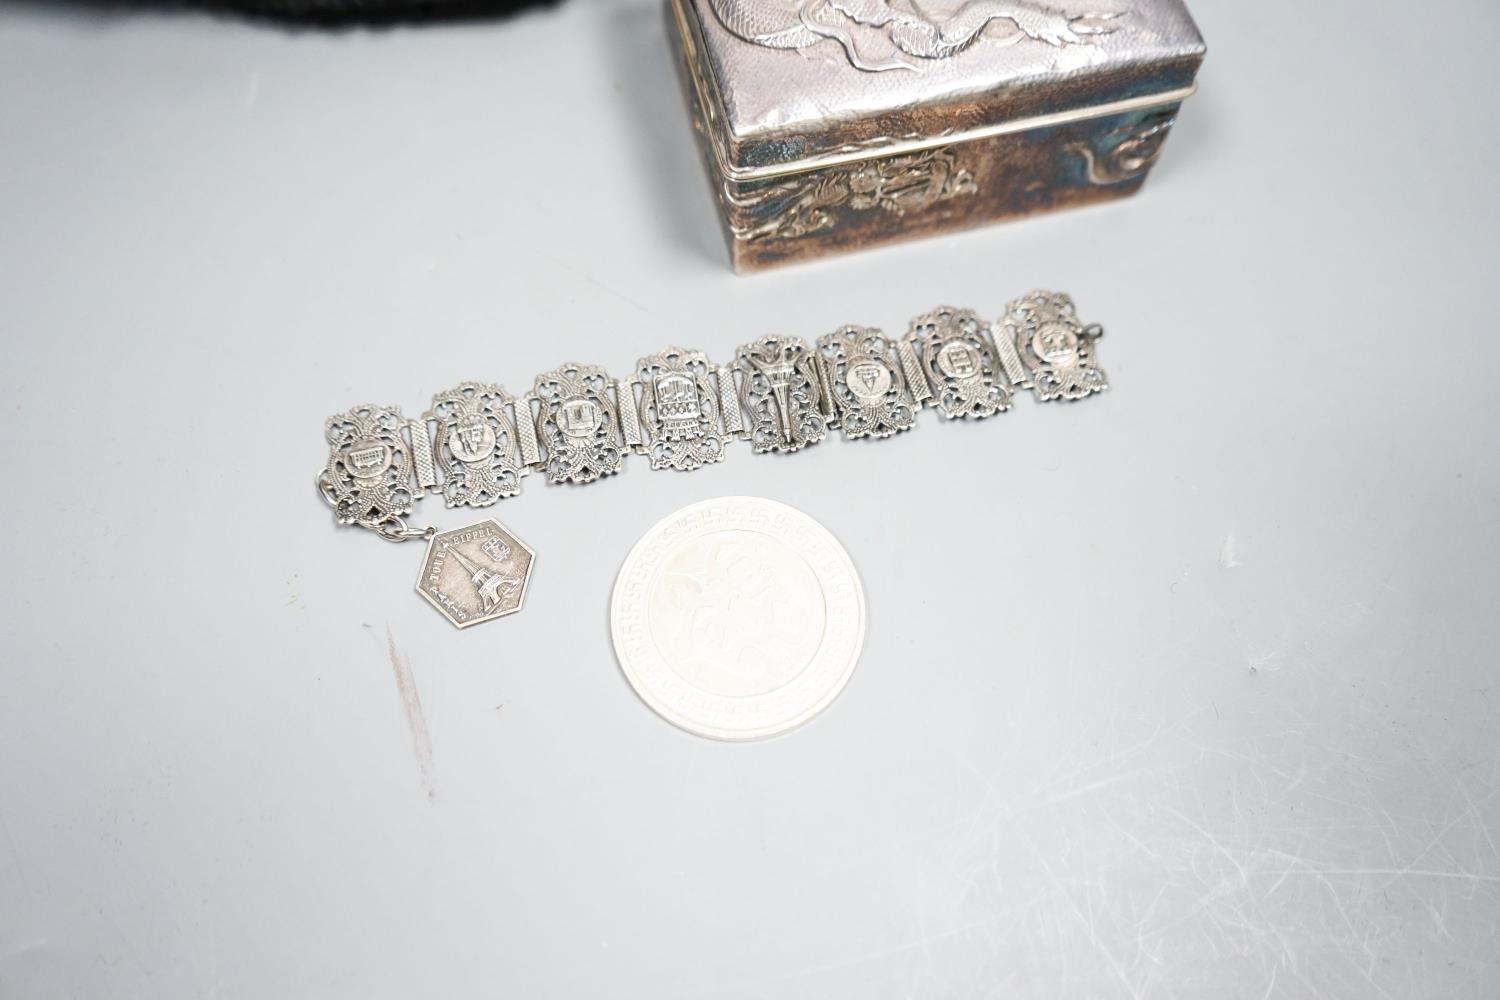 A Japanese silver box, bracelet, medal and military cap - Image 5 of 7